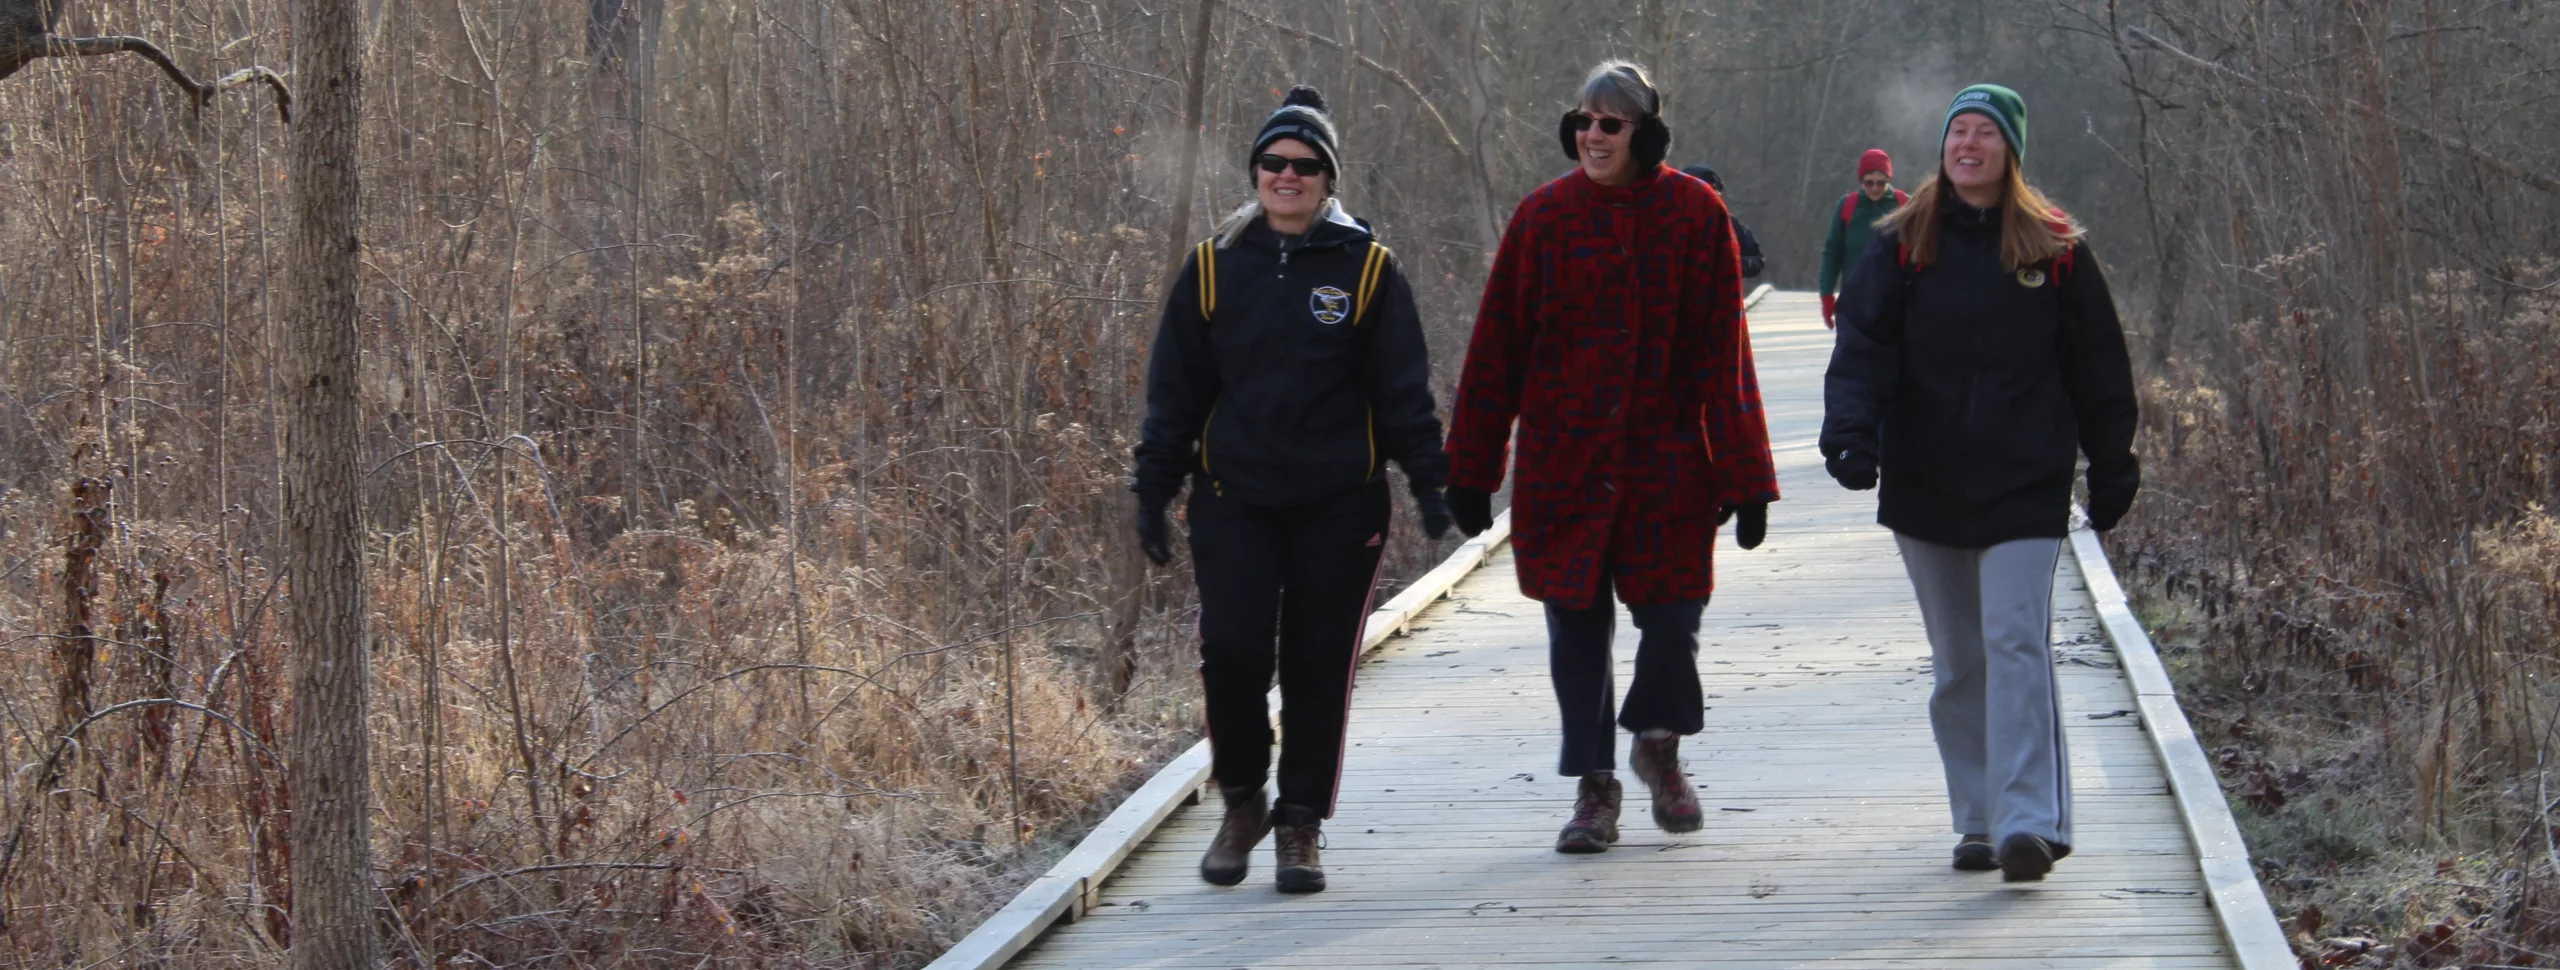 Three people smile while walking down boardwalk trail surrounded by woods during winter. They are bundled in jackets and hats. Two more people walk a distance behind them.